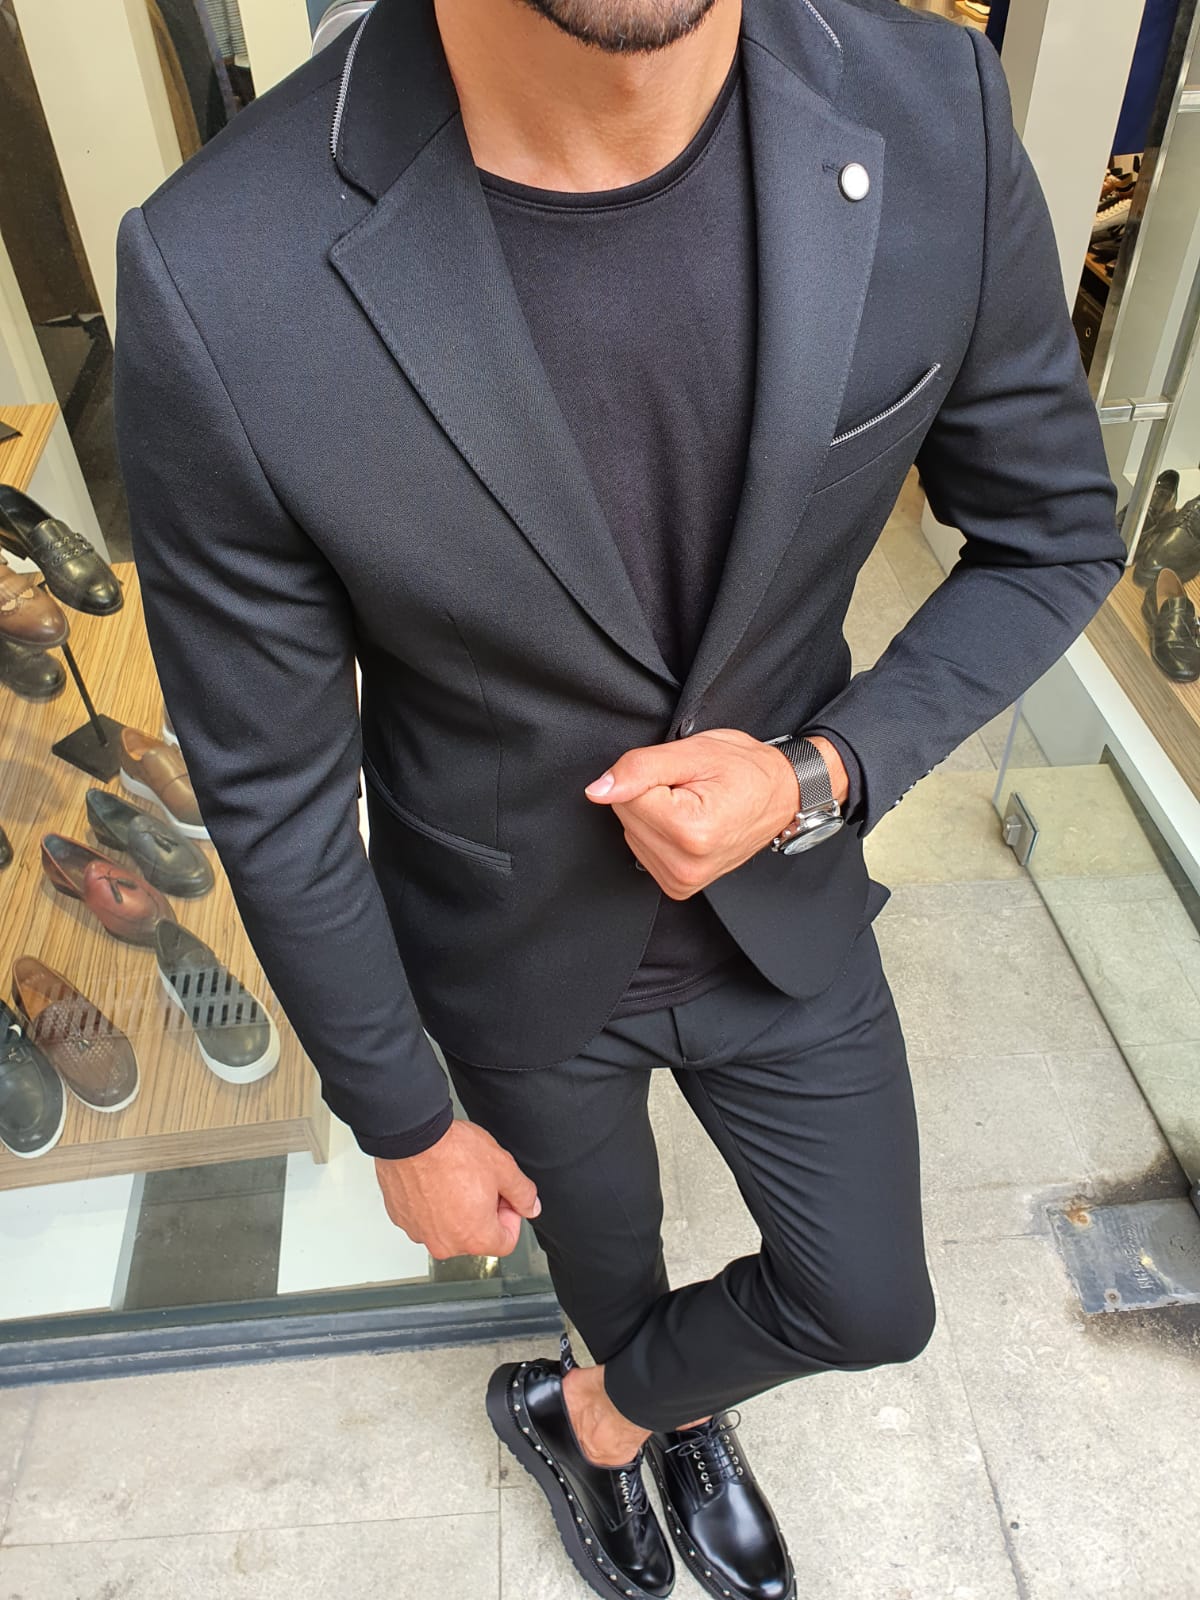 Diversen kaart vat Buy Black Slim Fit Suit by GentWith.com with Free Shipping